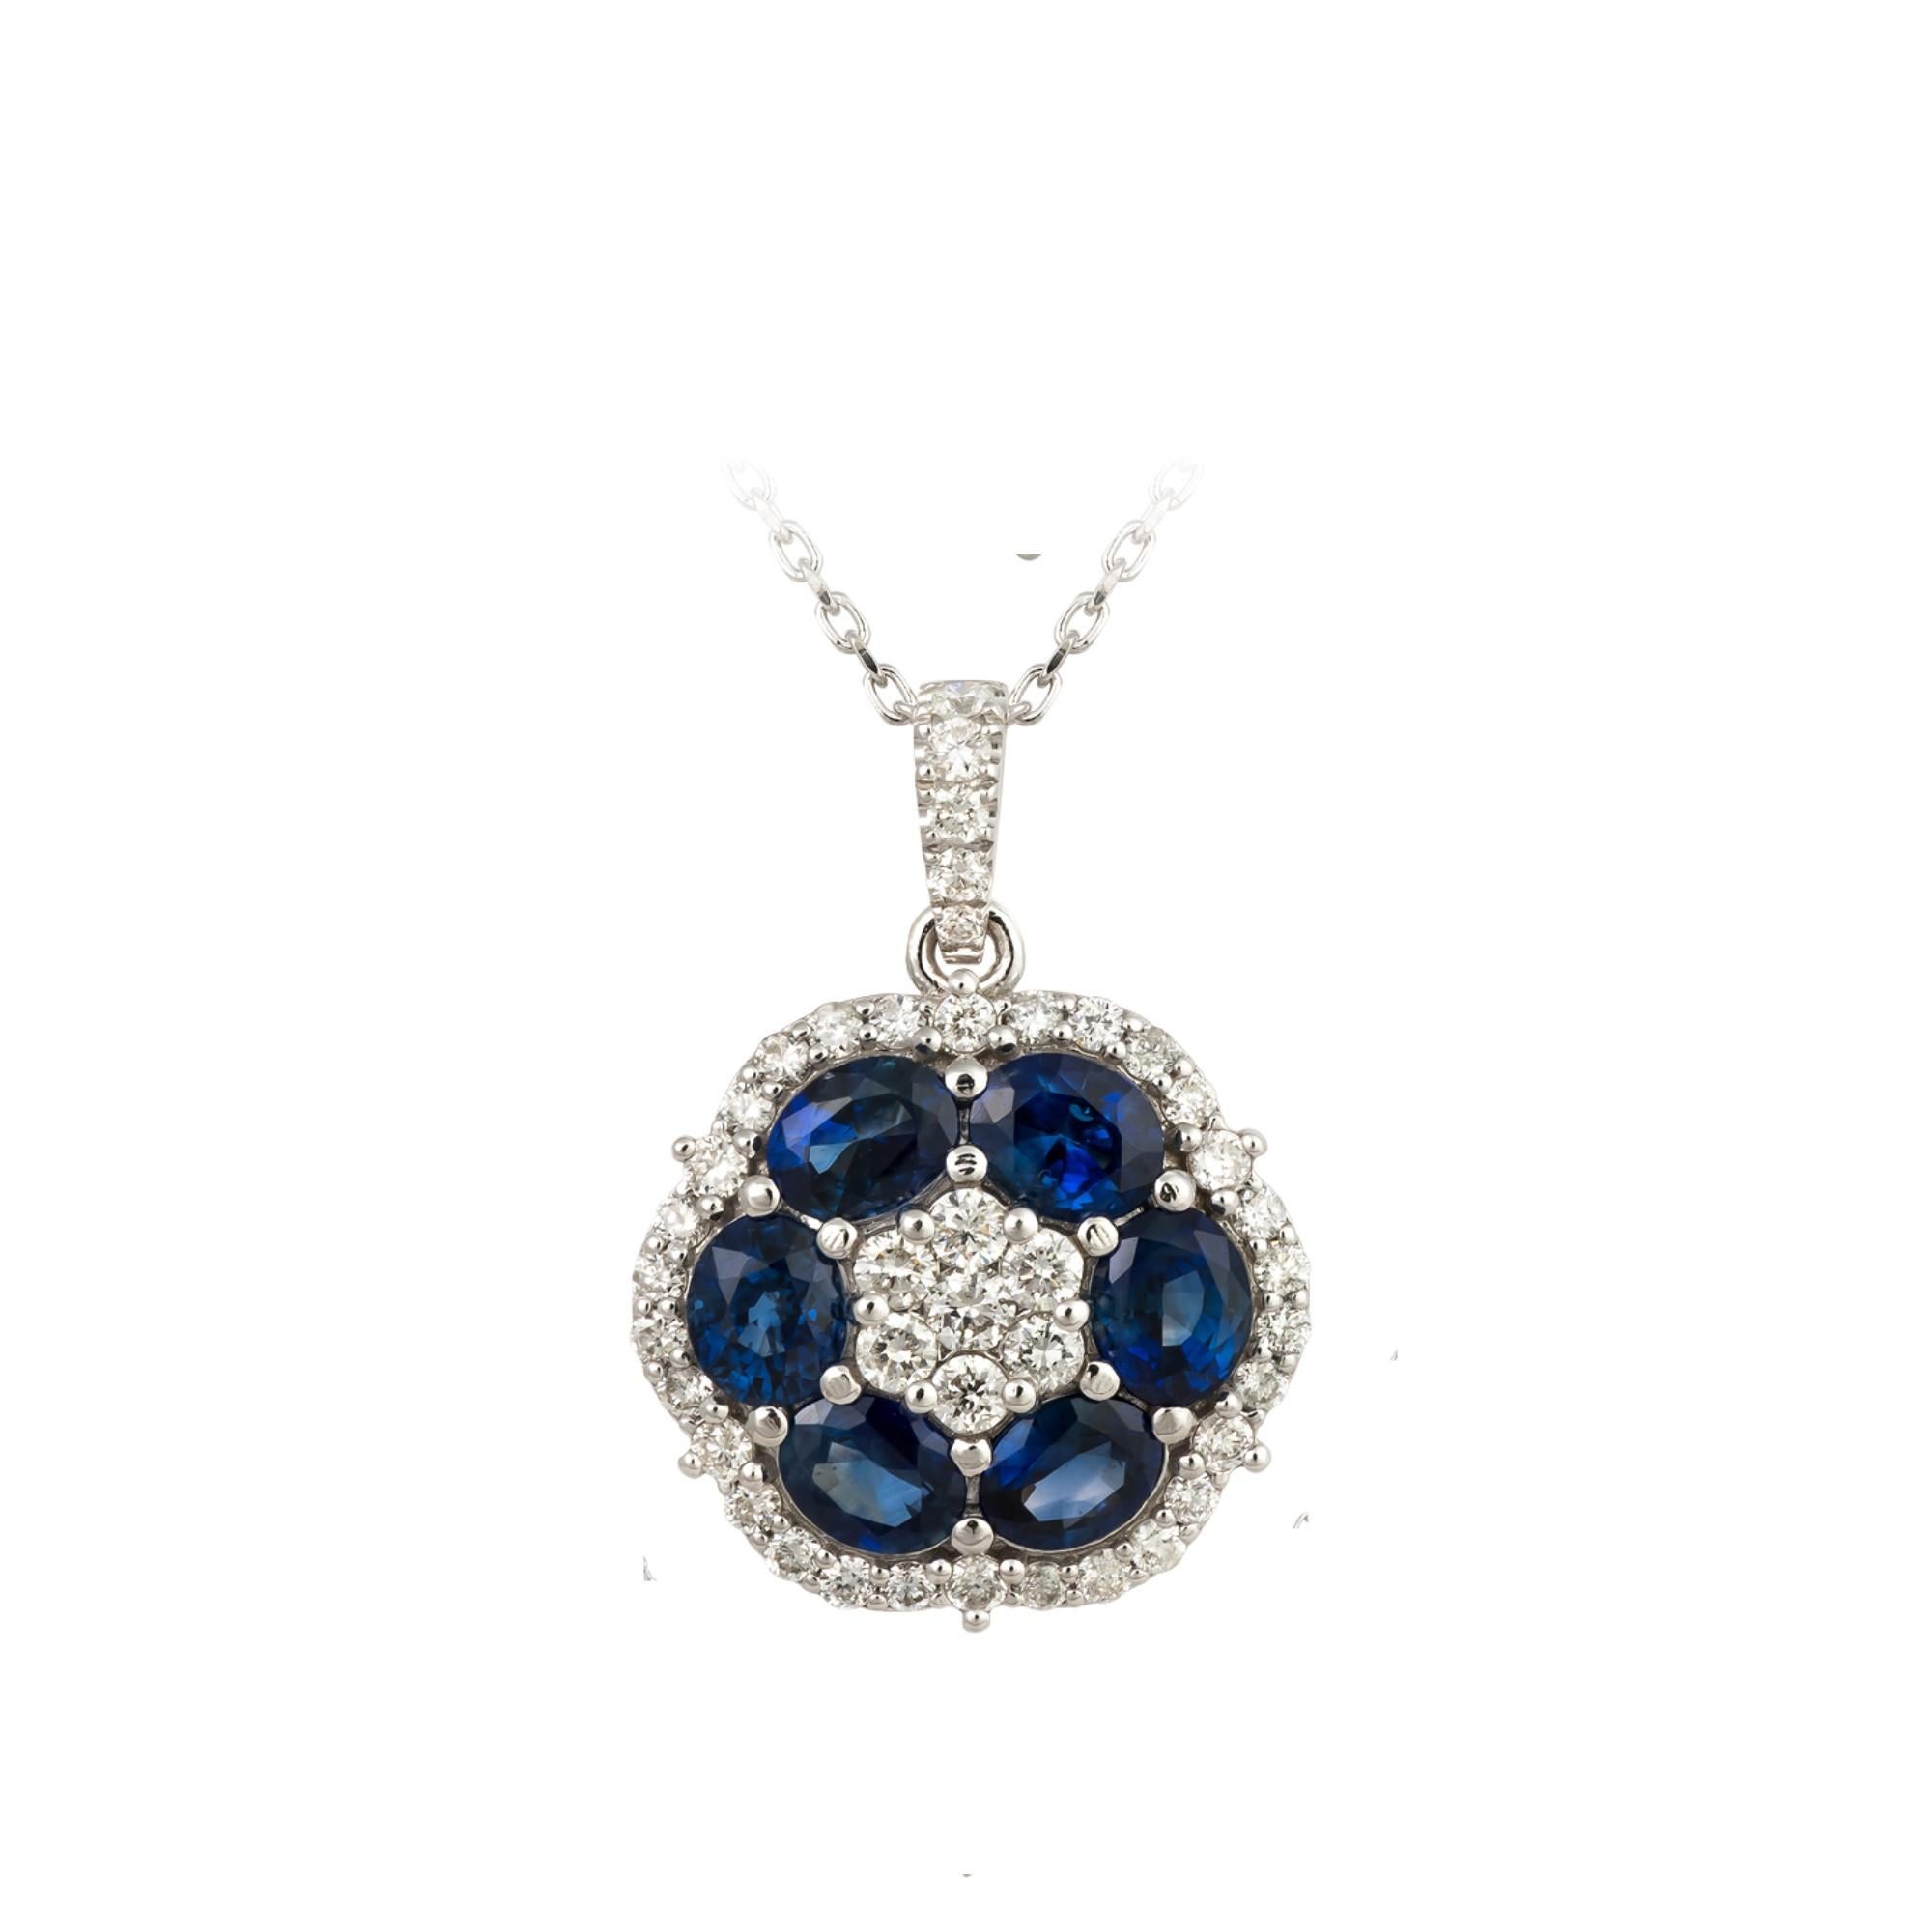 The Following Item we are offering is a Rare Important Radiant 18KT Gold Gorgeous Large Shimmering Blue Sapphire and Diamond Pendant Necklace. Pendant is comprised of Beautiful Shimmering Magnificent Blue Sapphires and adorned with Glittering